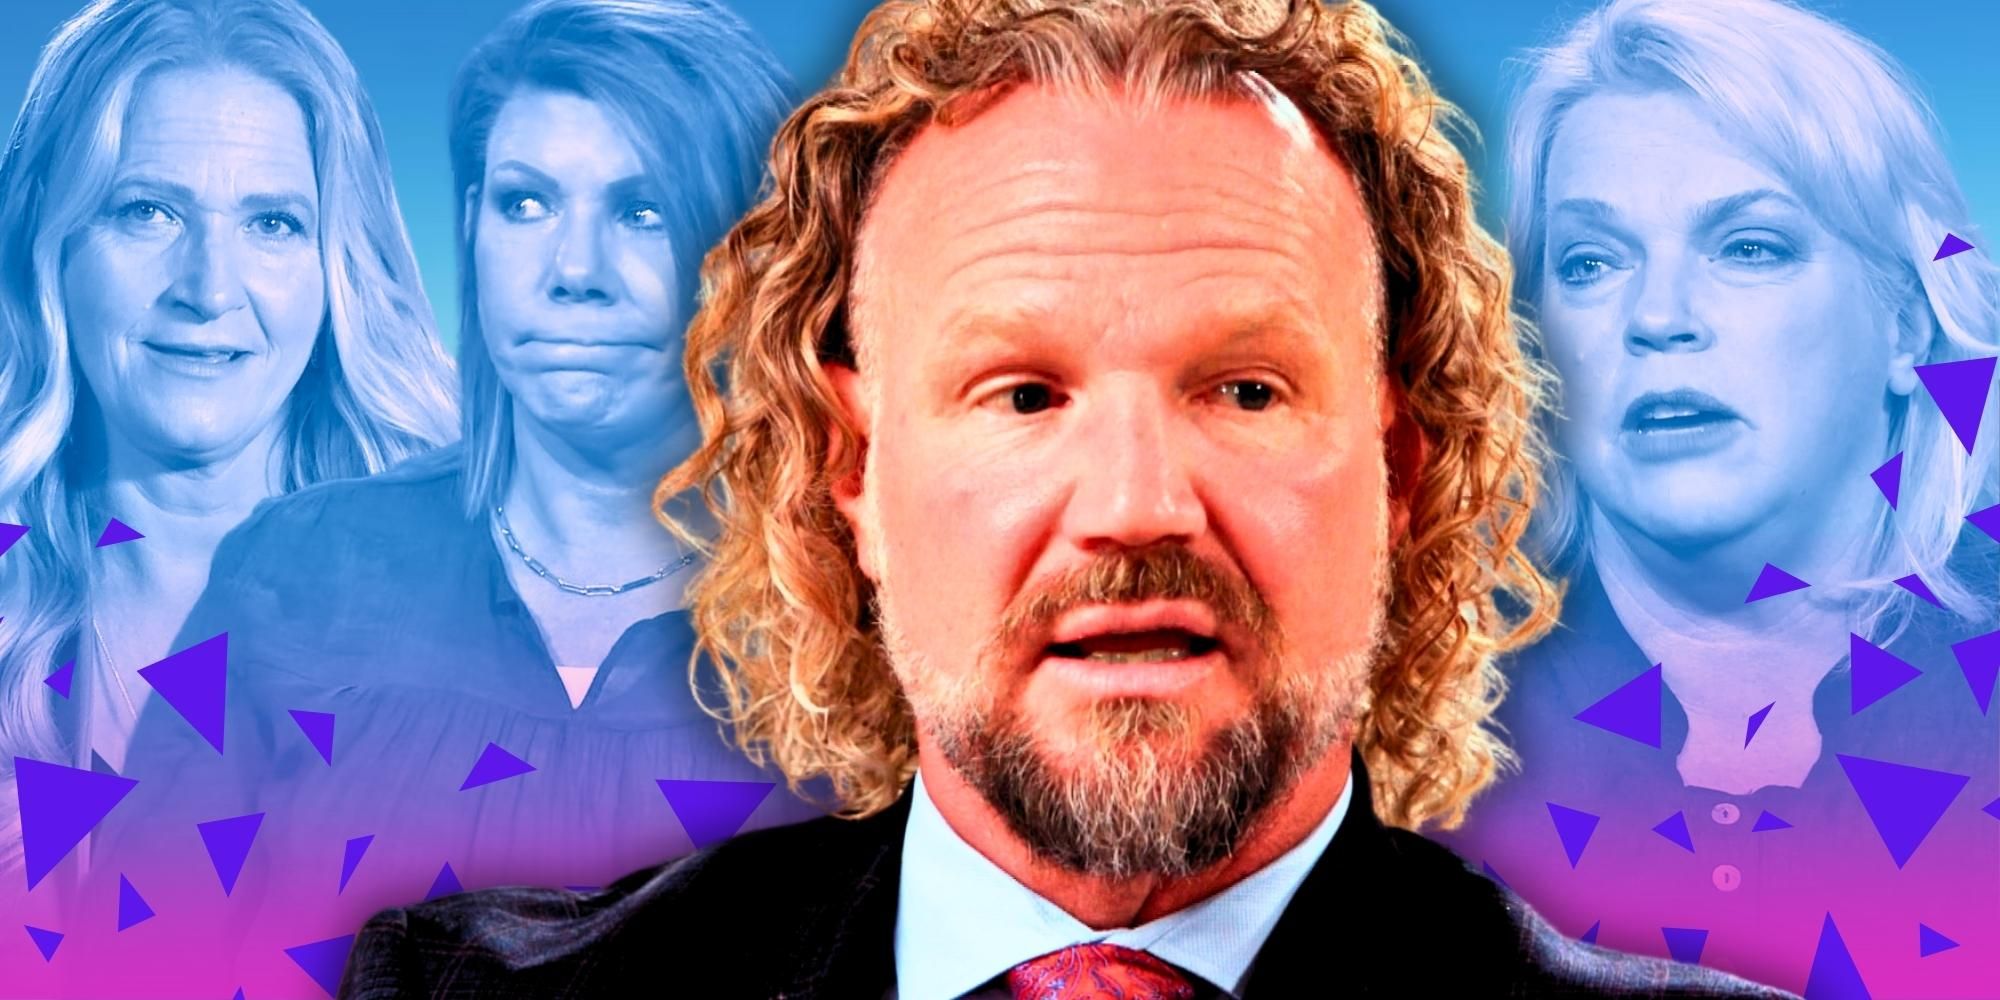 Sister Wives: Kody Brown Is Most Compatible With This Star Sign (Will He Get Another Wife?)